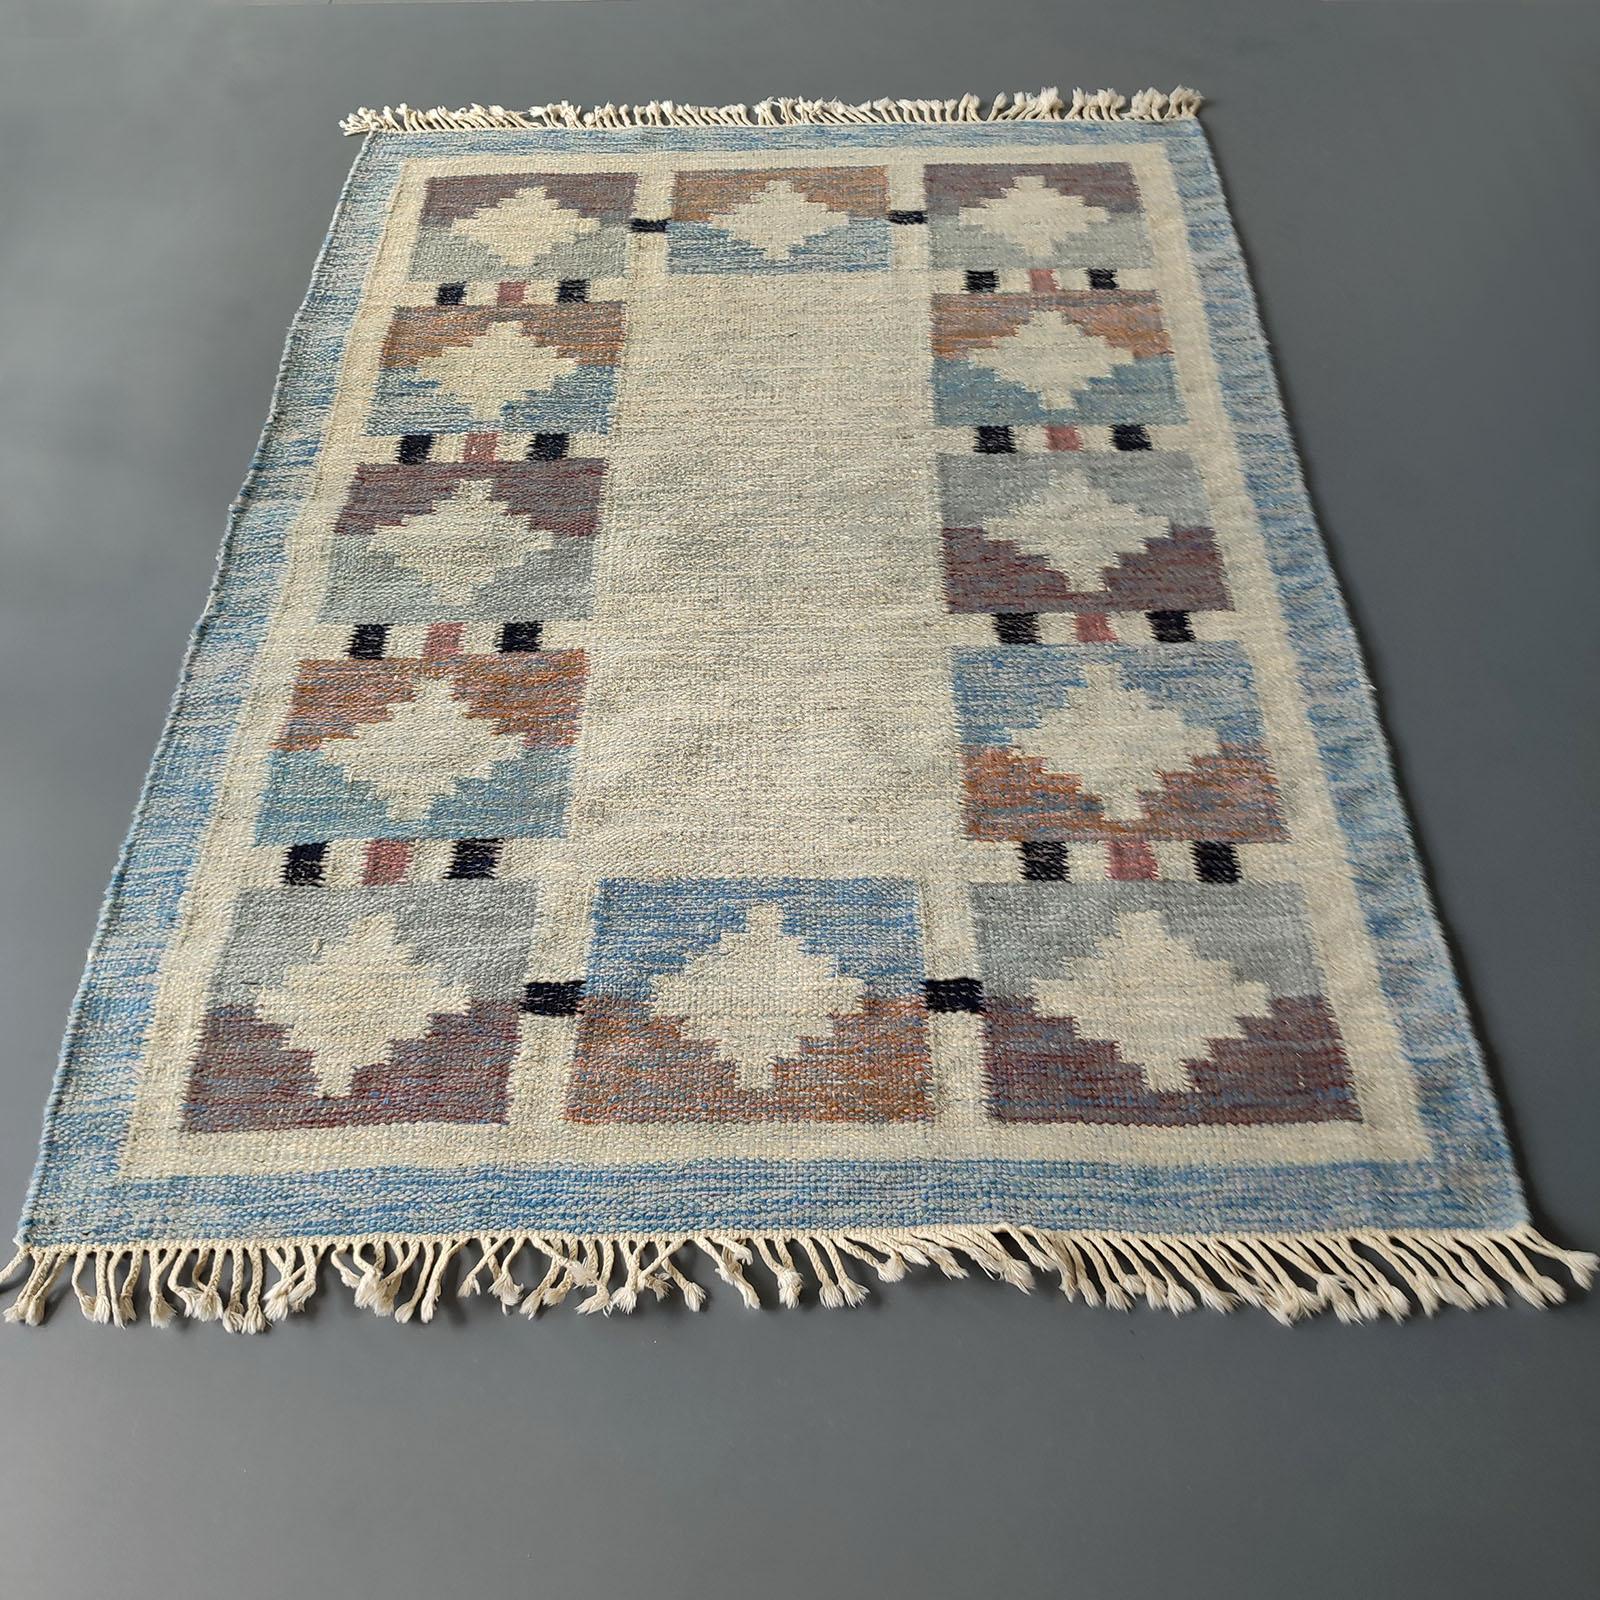 Genuine Vintage Scandinavian Kilim rug, design attributed to Karin Jönsson. 
The color palette comprises of gentle shades of beige, brown and grey, with black and rust pink accents, against a neutral beige background, with faded blue border, in